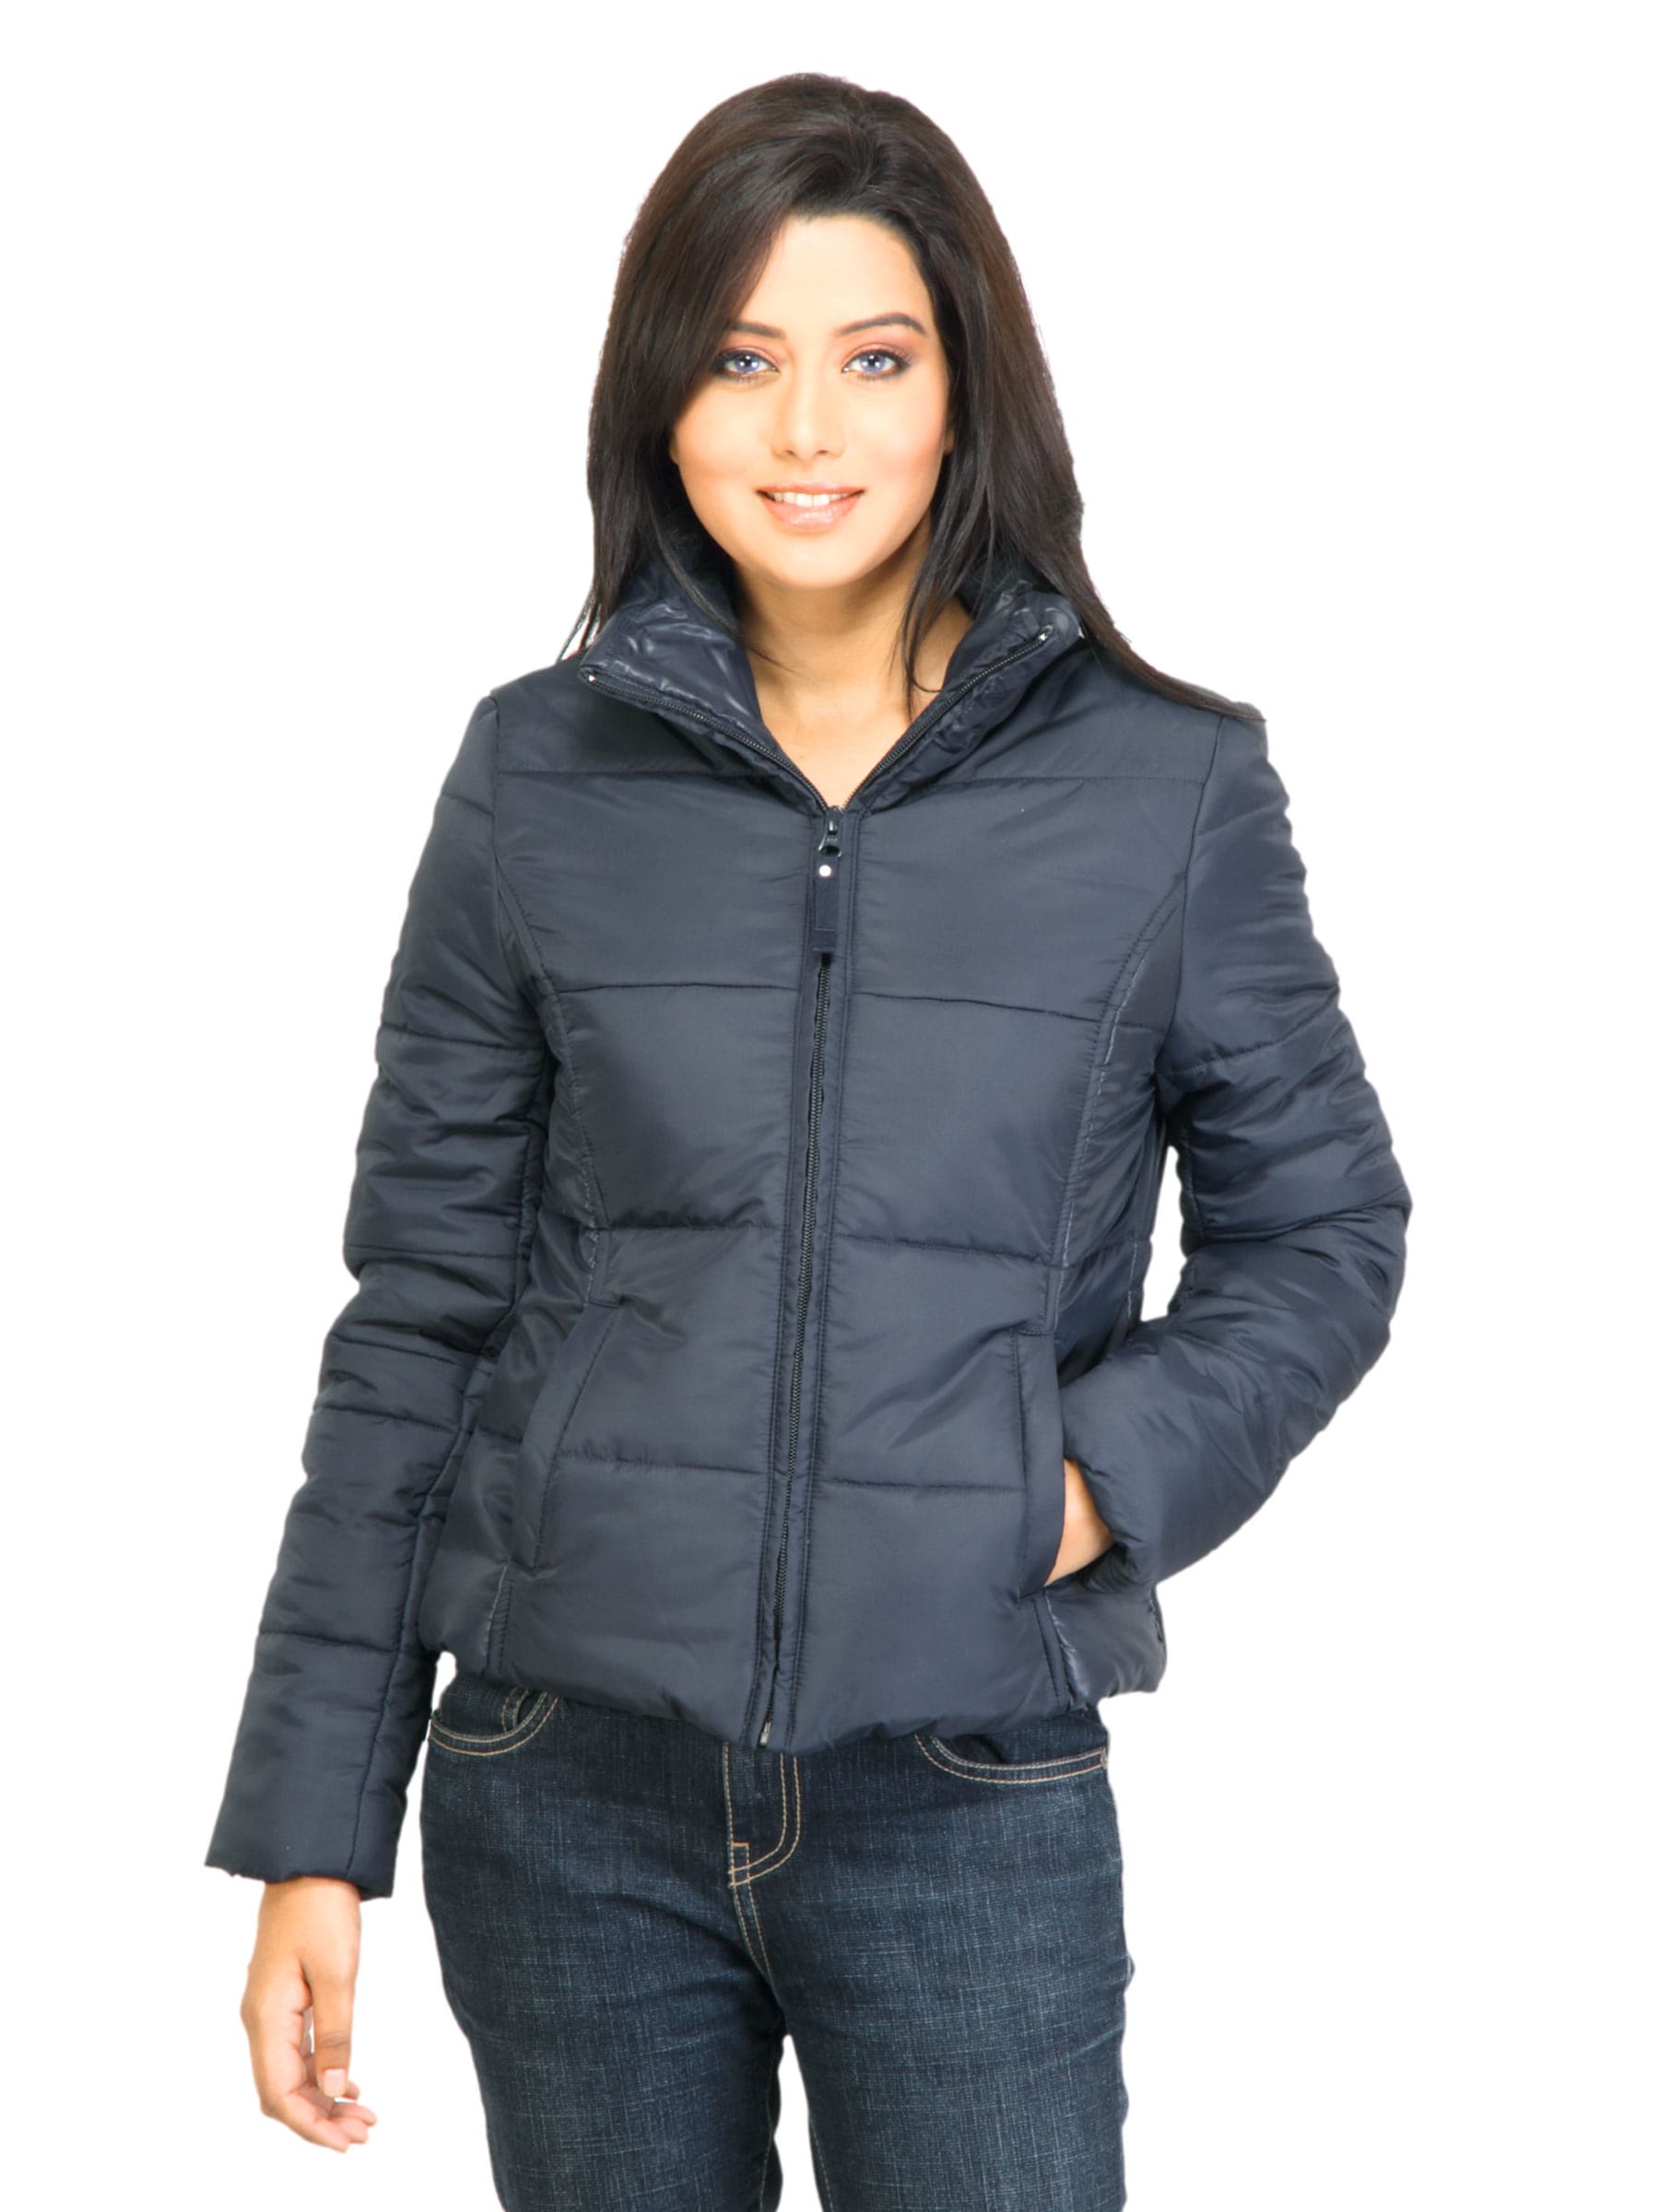 United Colors of Benetton Women Solid Navy Blue Jacket